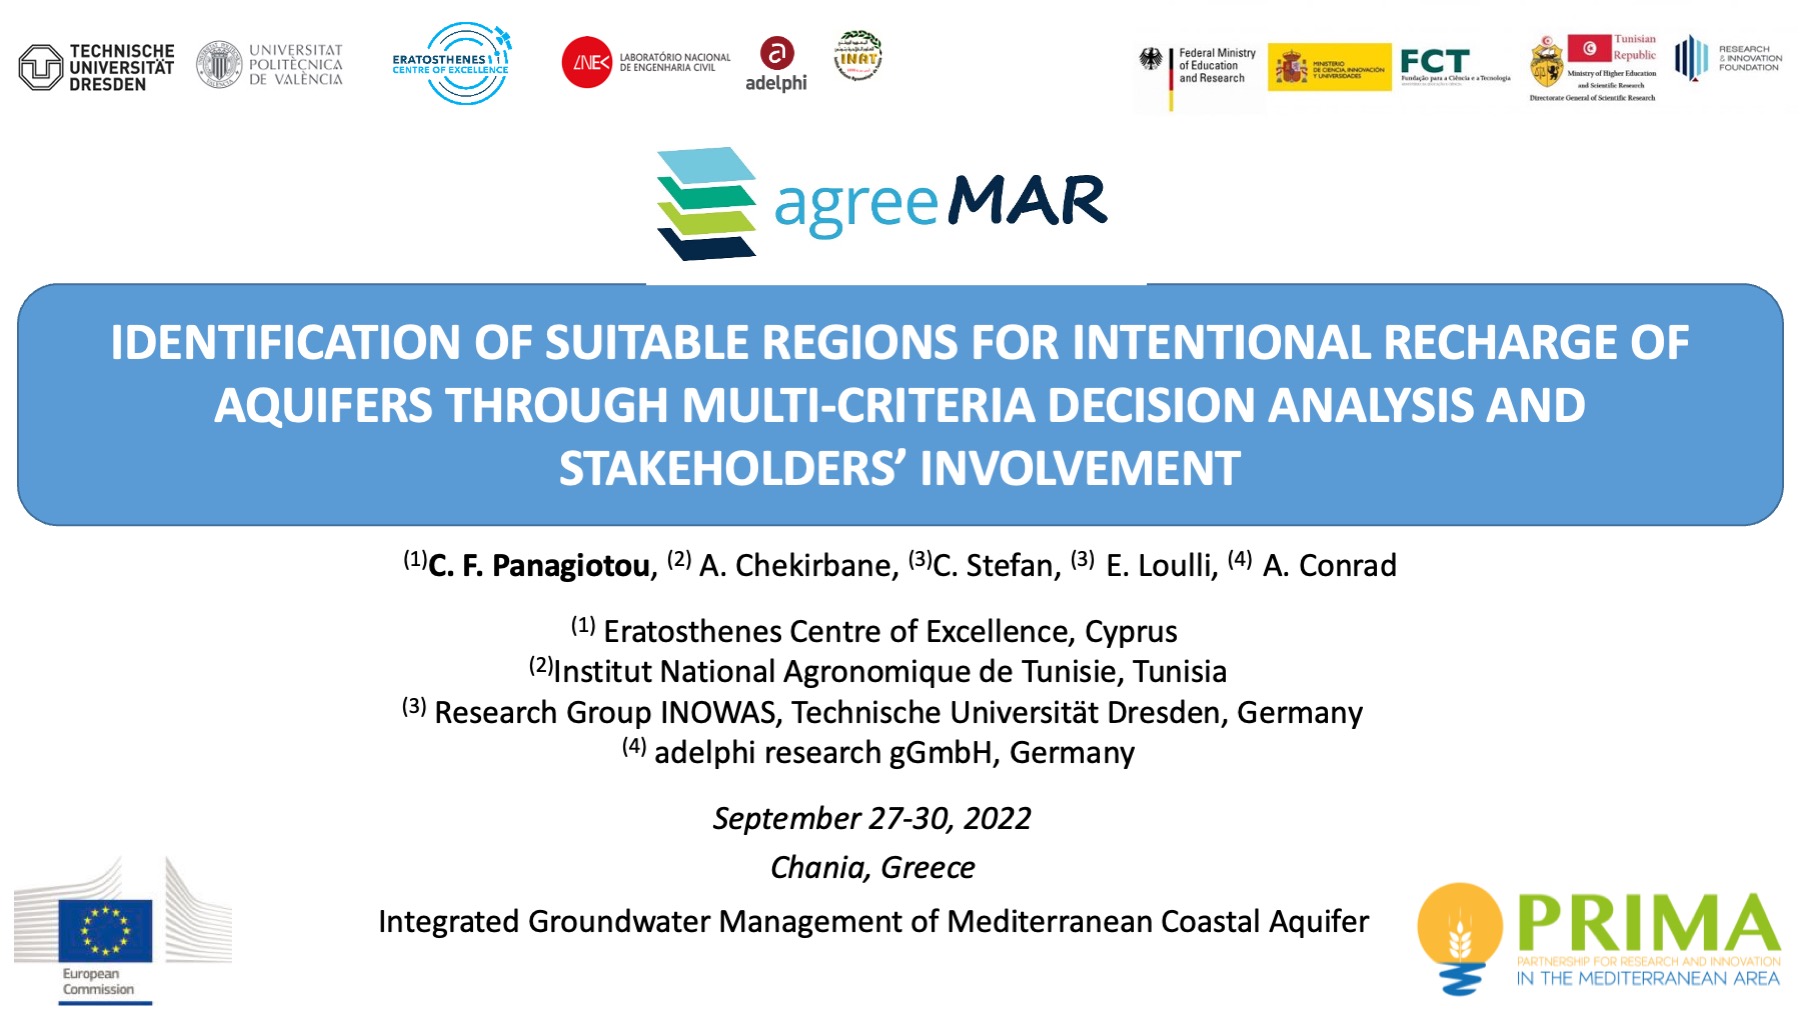 AGREEMAR at the International Conference on Integrated Groundwater Management of Mediterranean Coastal Aquifers